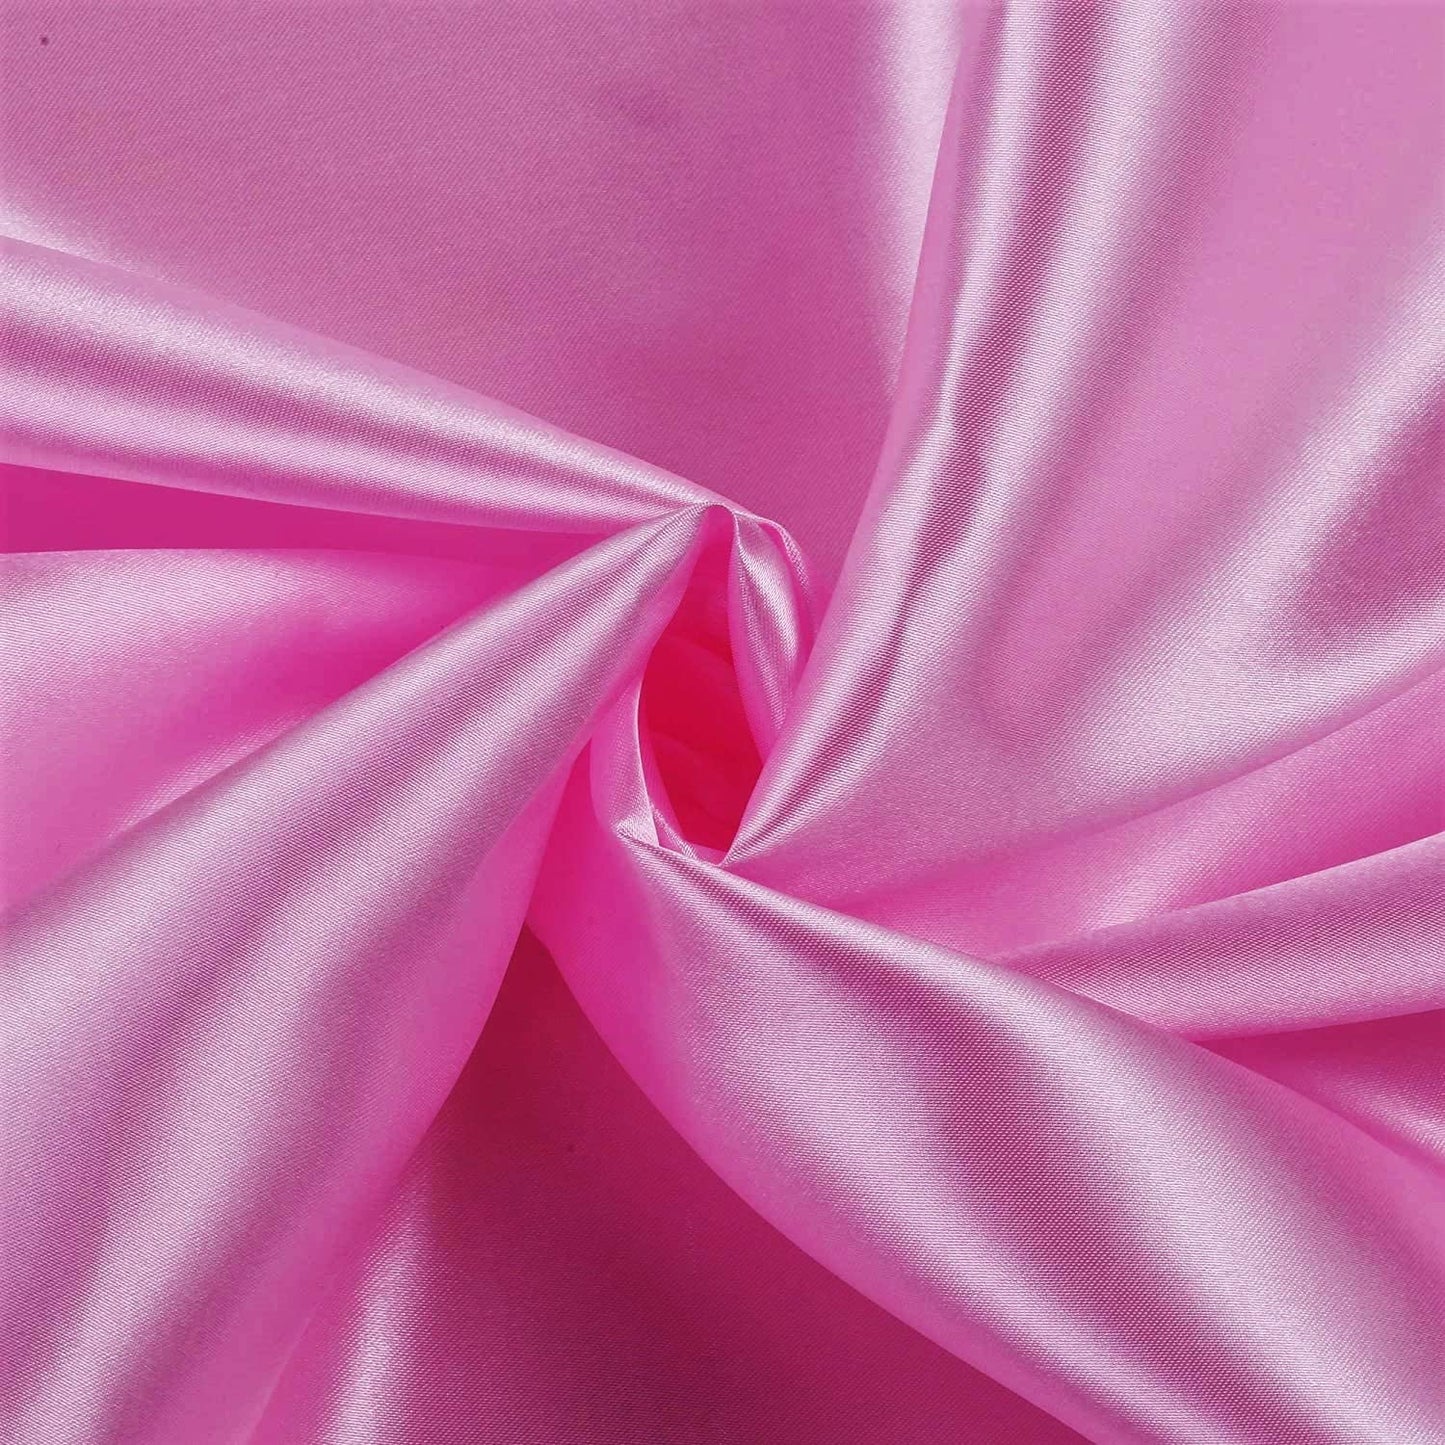 100% Polyester Soft Bridal Charmeuse Satin Fabric (Candy Pink # 15,